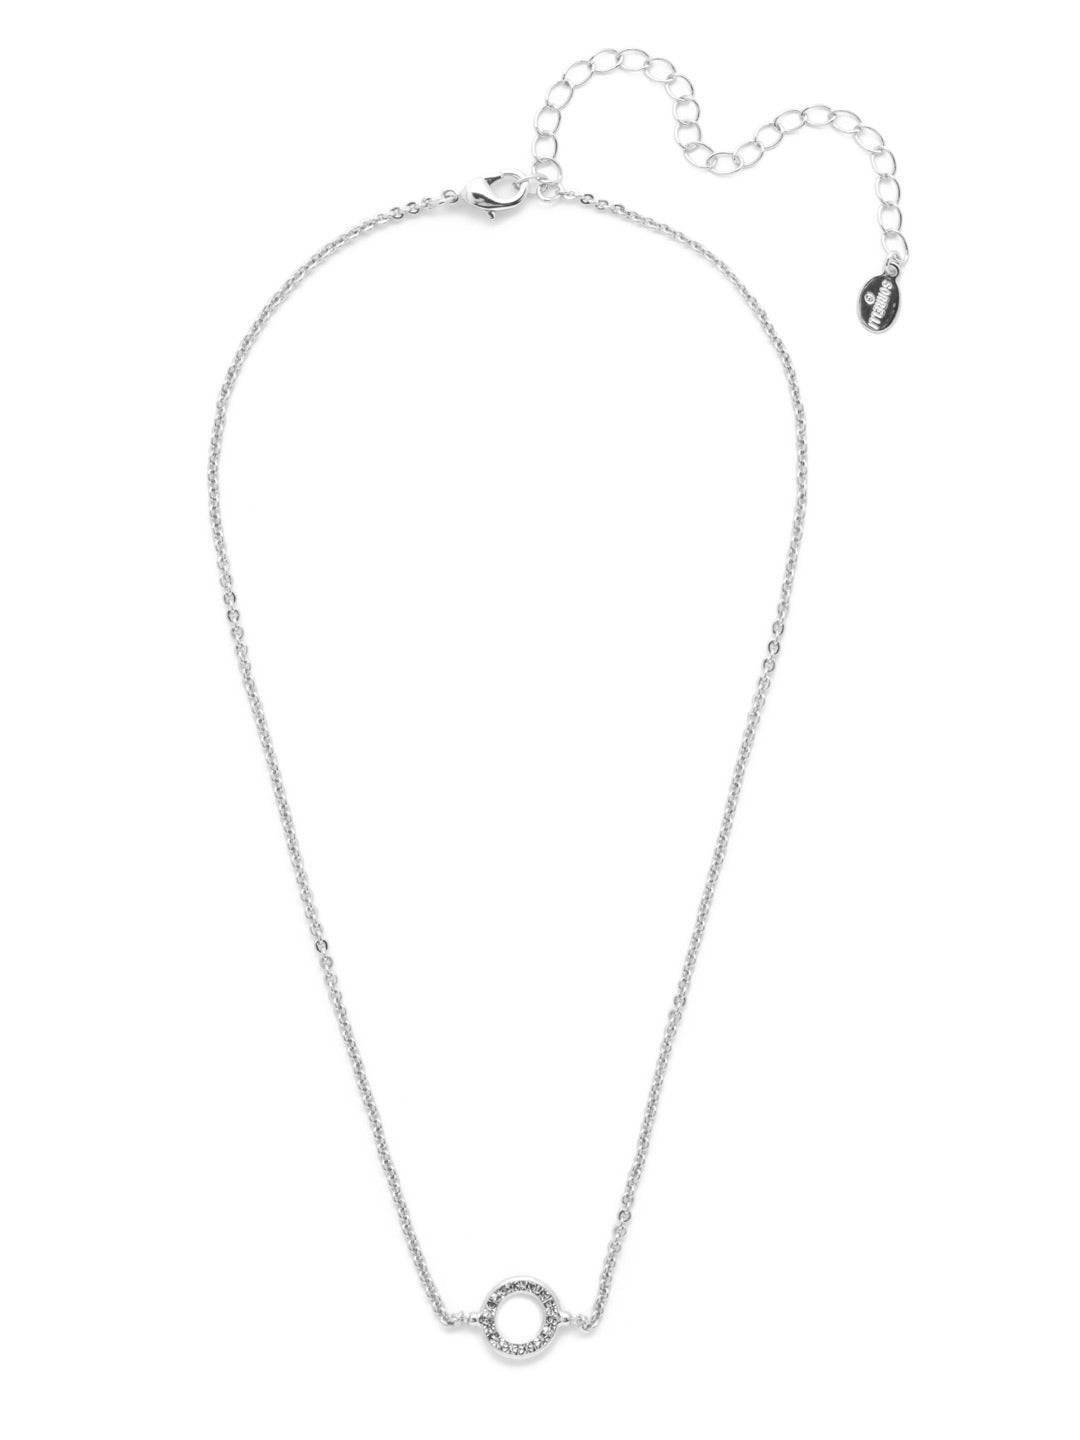 Brianna Pendant Necklace - 4NEV7PDCRY - <p>The Briana Pendant Necklace spotlights a ring of crystals on an adjustable chain. From Sorrelli's Crystal collection in our Palladium finish.</p>